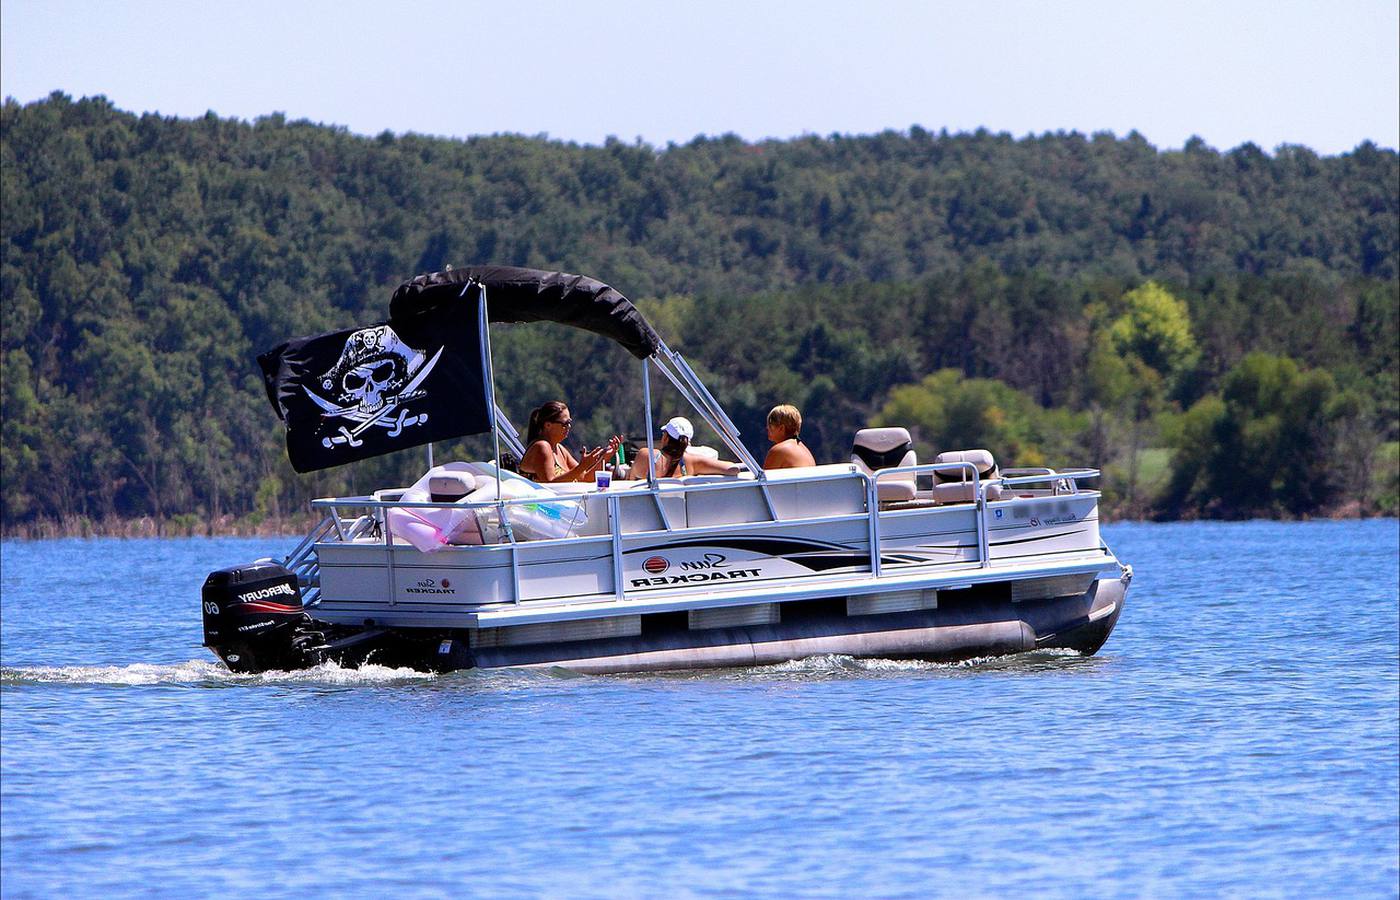 The Most Expensive Pontoon Boats and Where in the World to Find Them